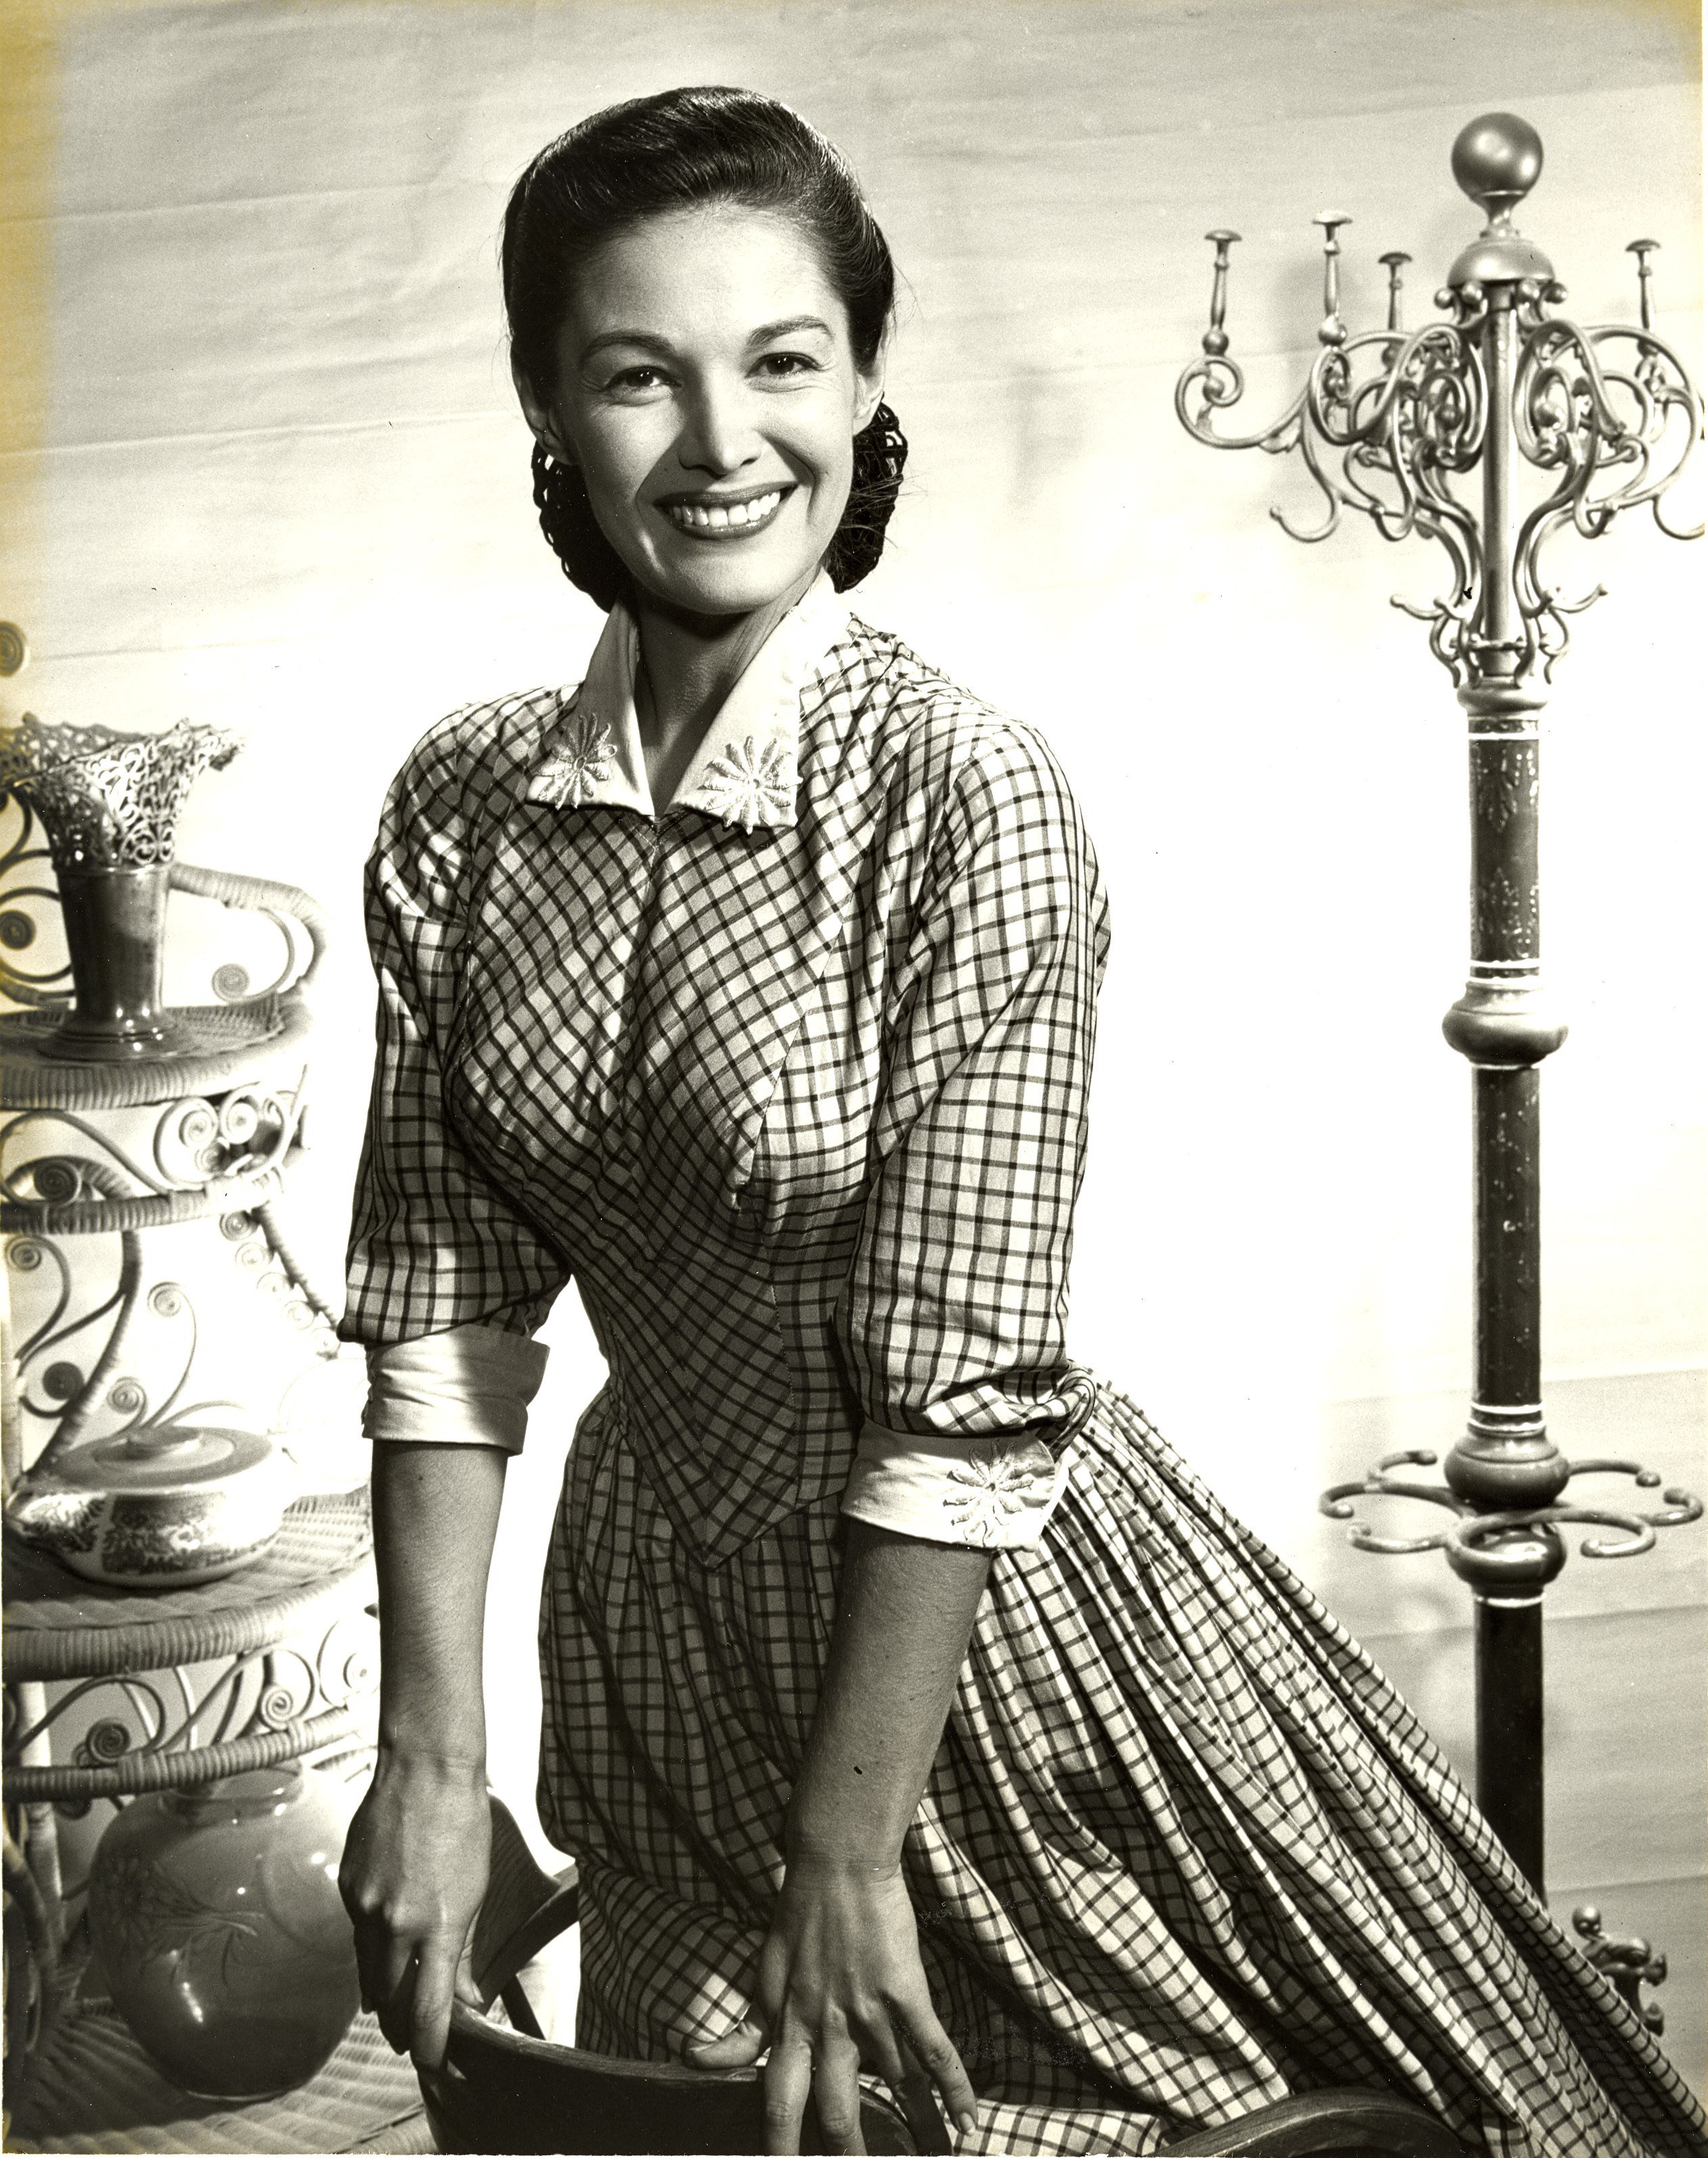 Joan Taylor appeared in 18 episodes of THE RIFLEMAN playing Milly Scott, Owner of the General Store bought from Hattie Denton.